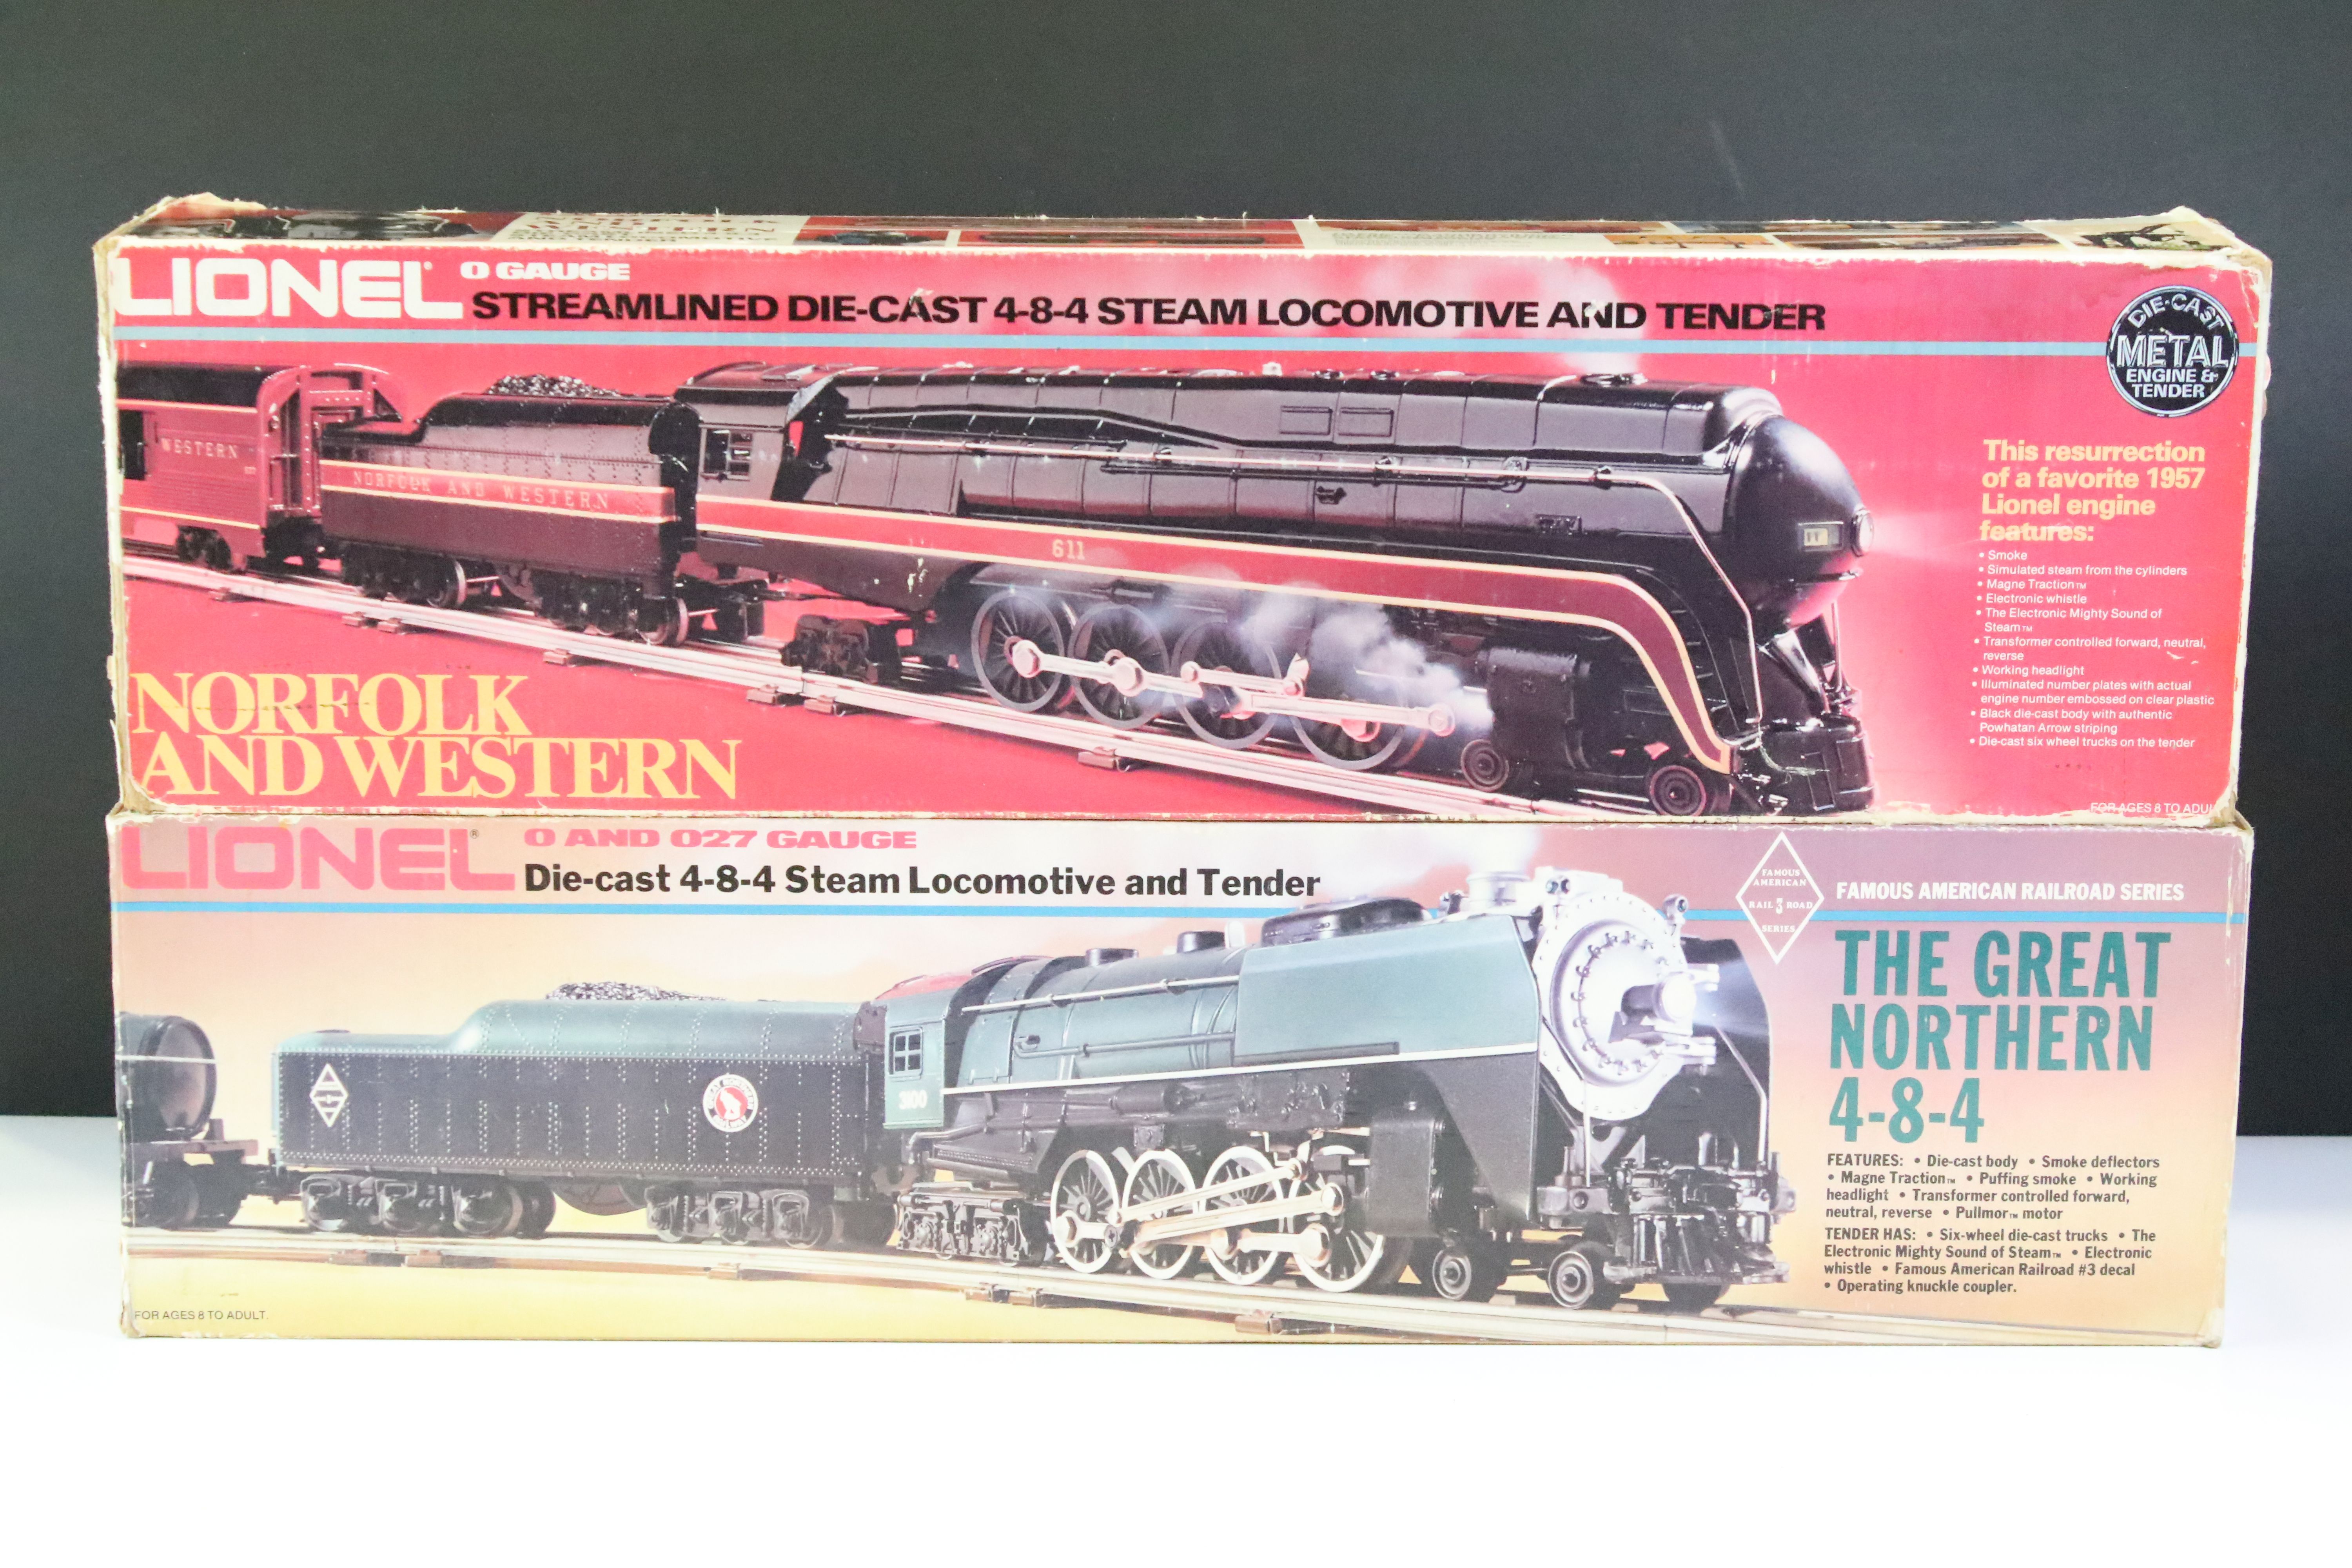 Two boxed Lionel O gauge locomotives to include 6-8100 Norfolk and Western Streamlined diecast 4-8-4